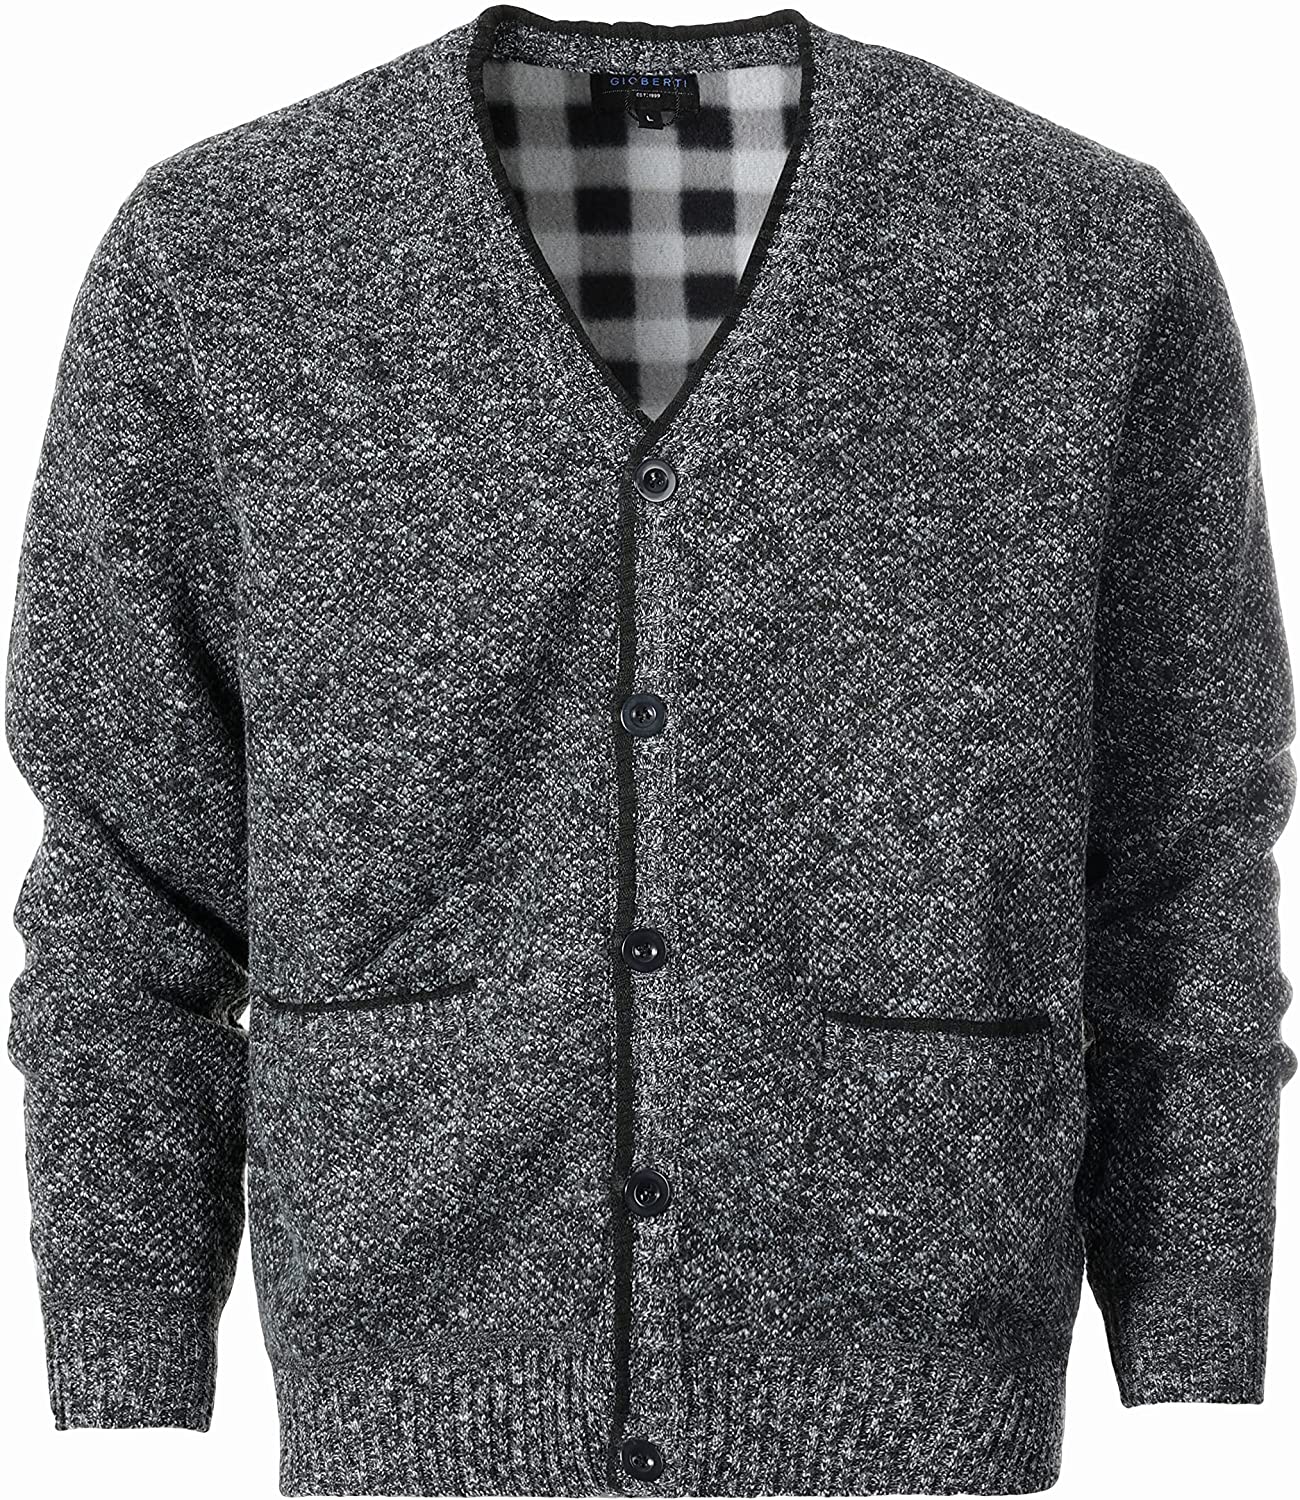 Gioberti Men's Knitted V-Neck Button Down Cardigan Sweater with Flannel Lining and Pockets